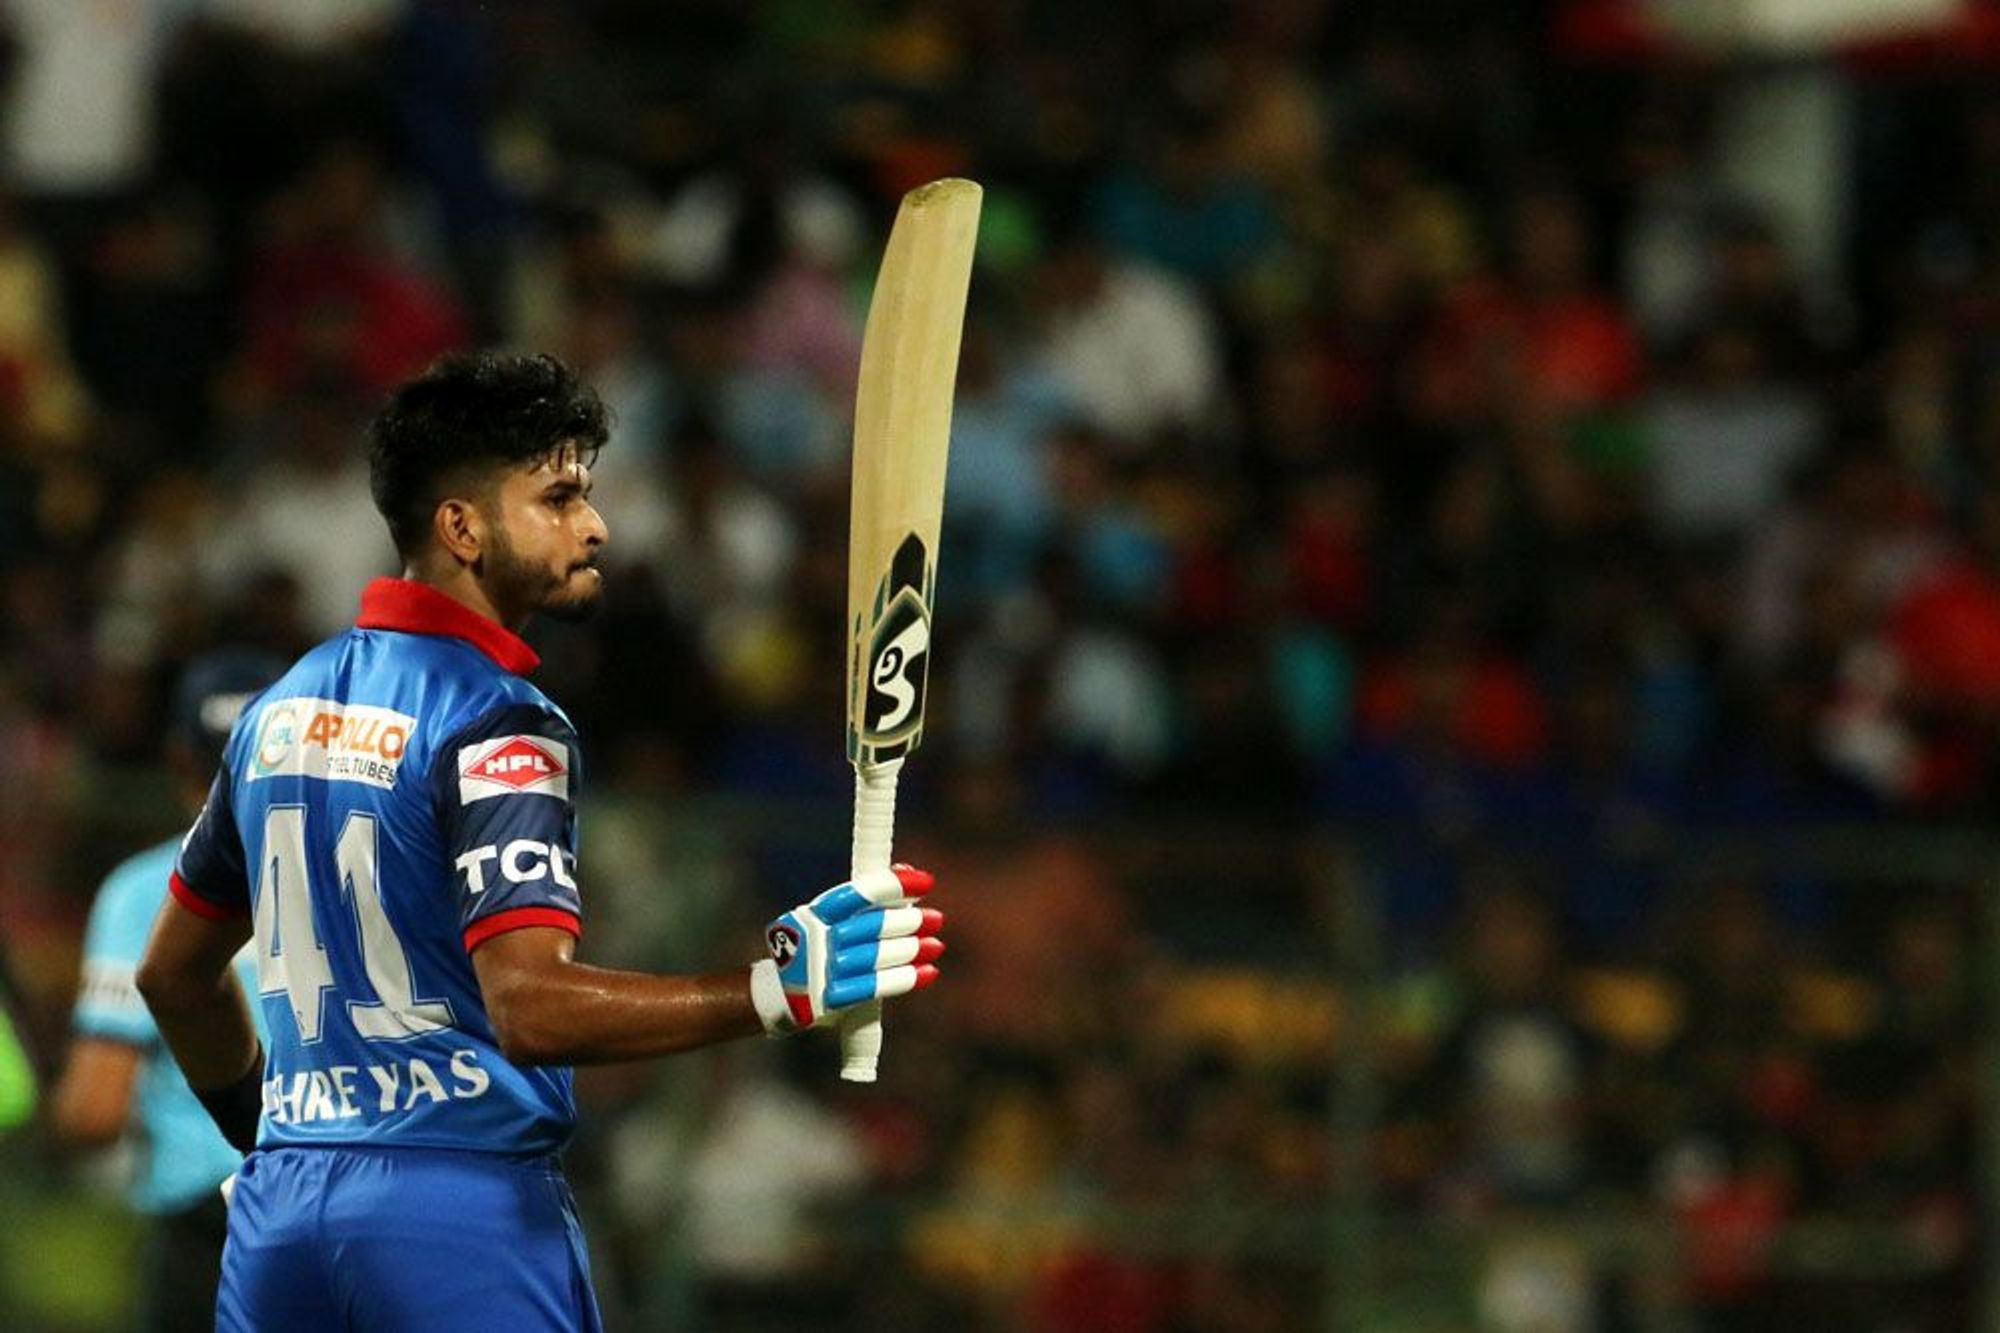 CSK vs DC | Player Ratings - Shreyas Iyer’s valliant fight in vain as Delhi Capitals lose to Chennai Super Kings by 80 runs